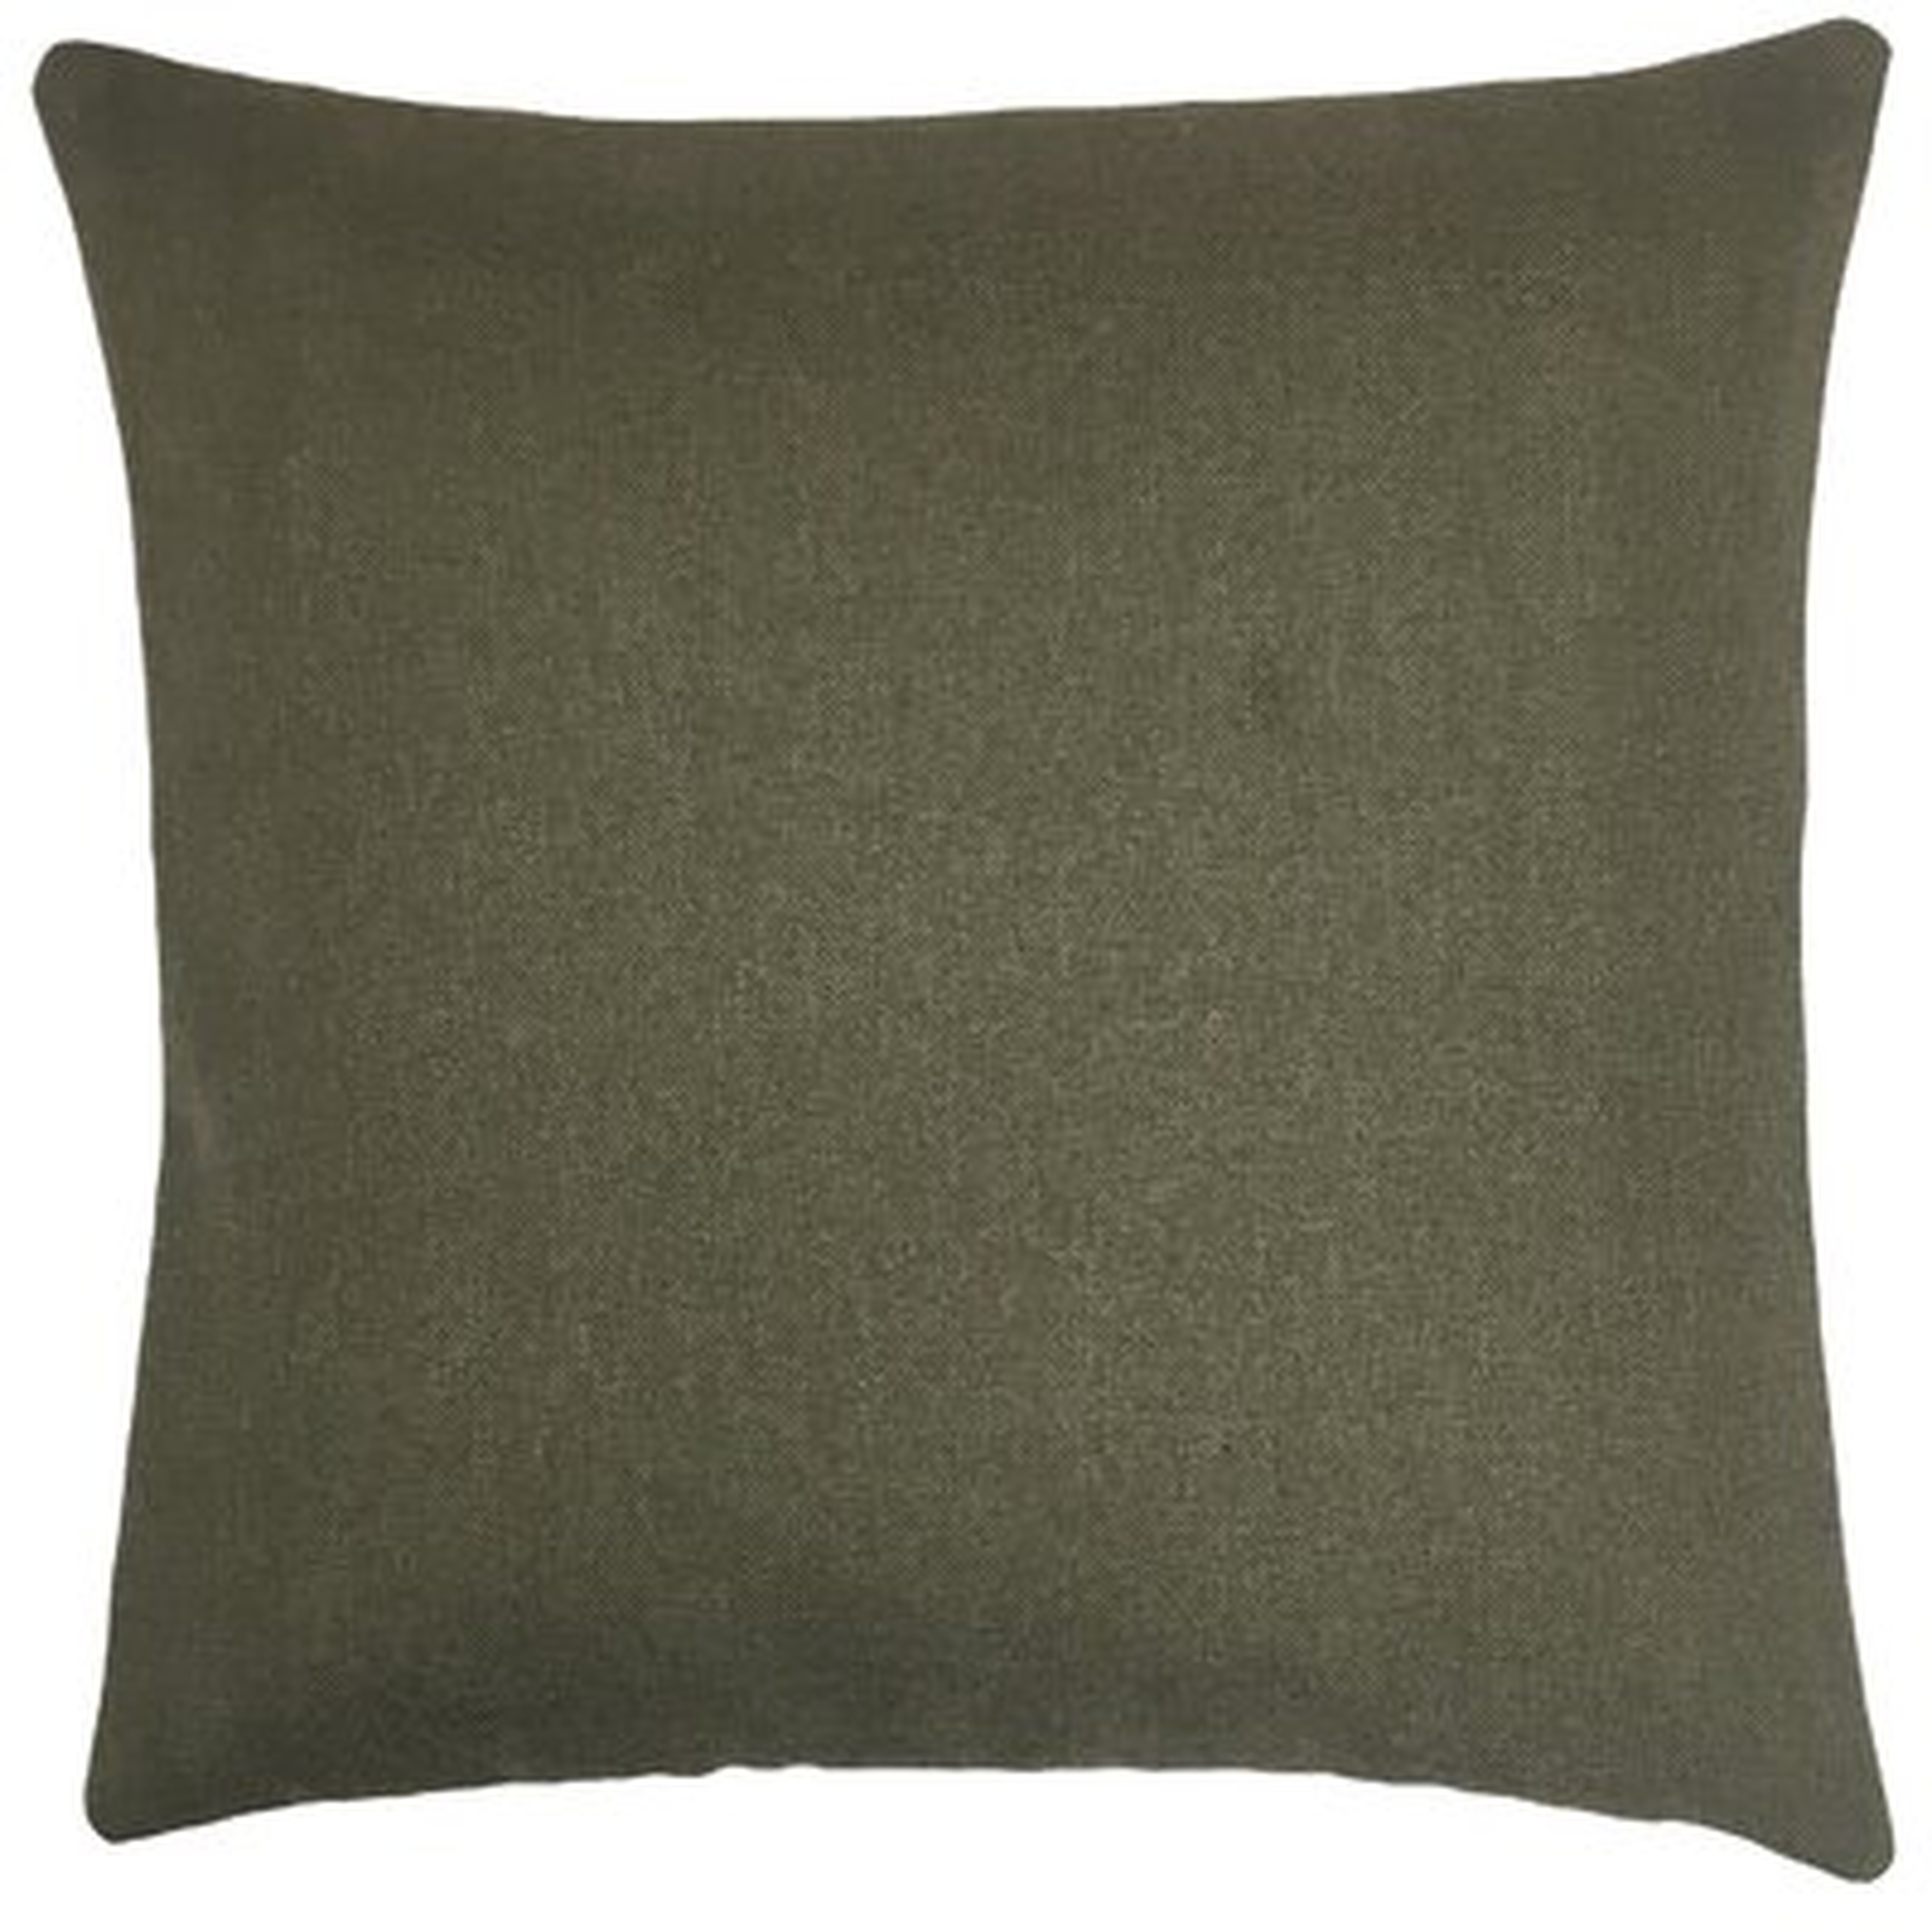 Araia Outdoor Square Pillow Cover and Insert - Wayfair